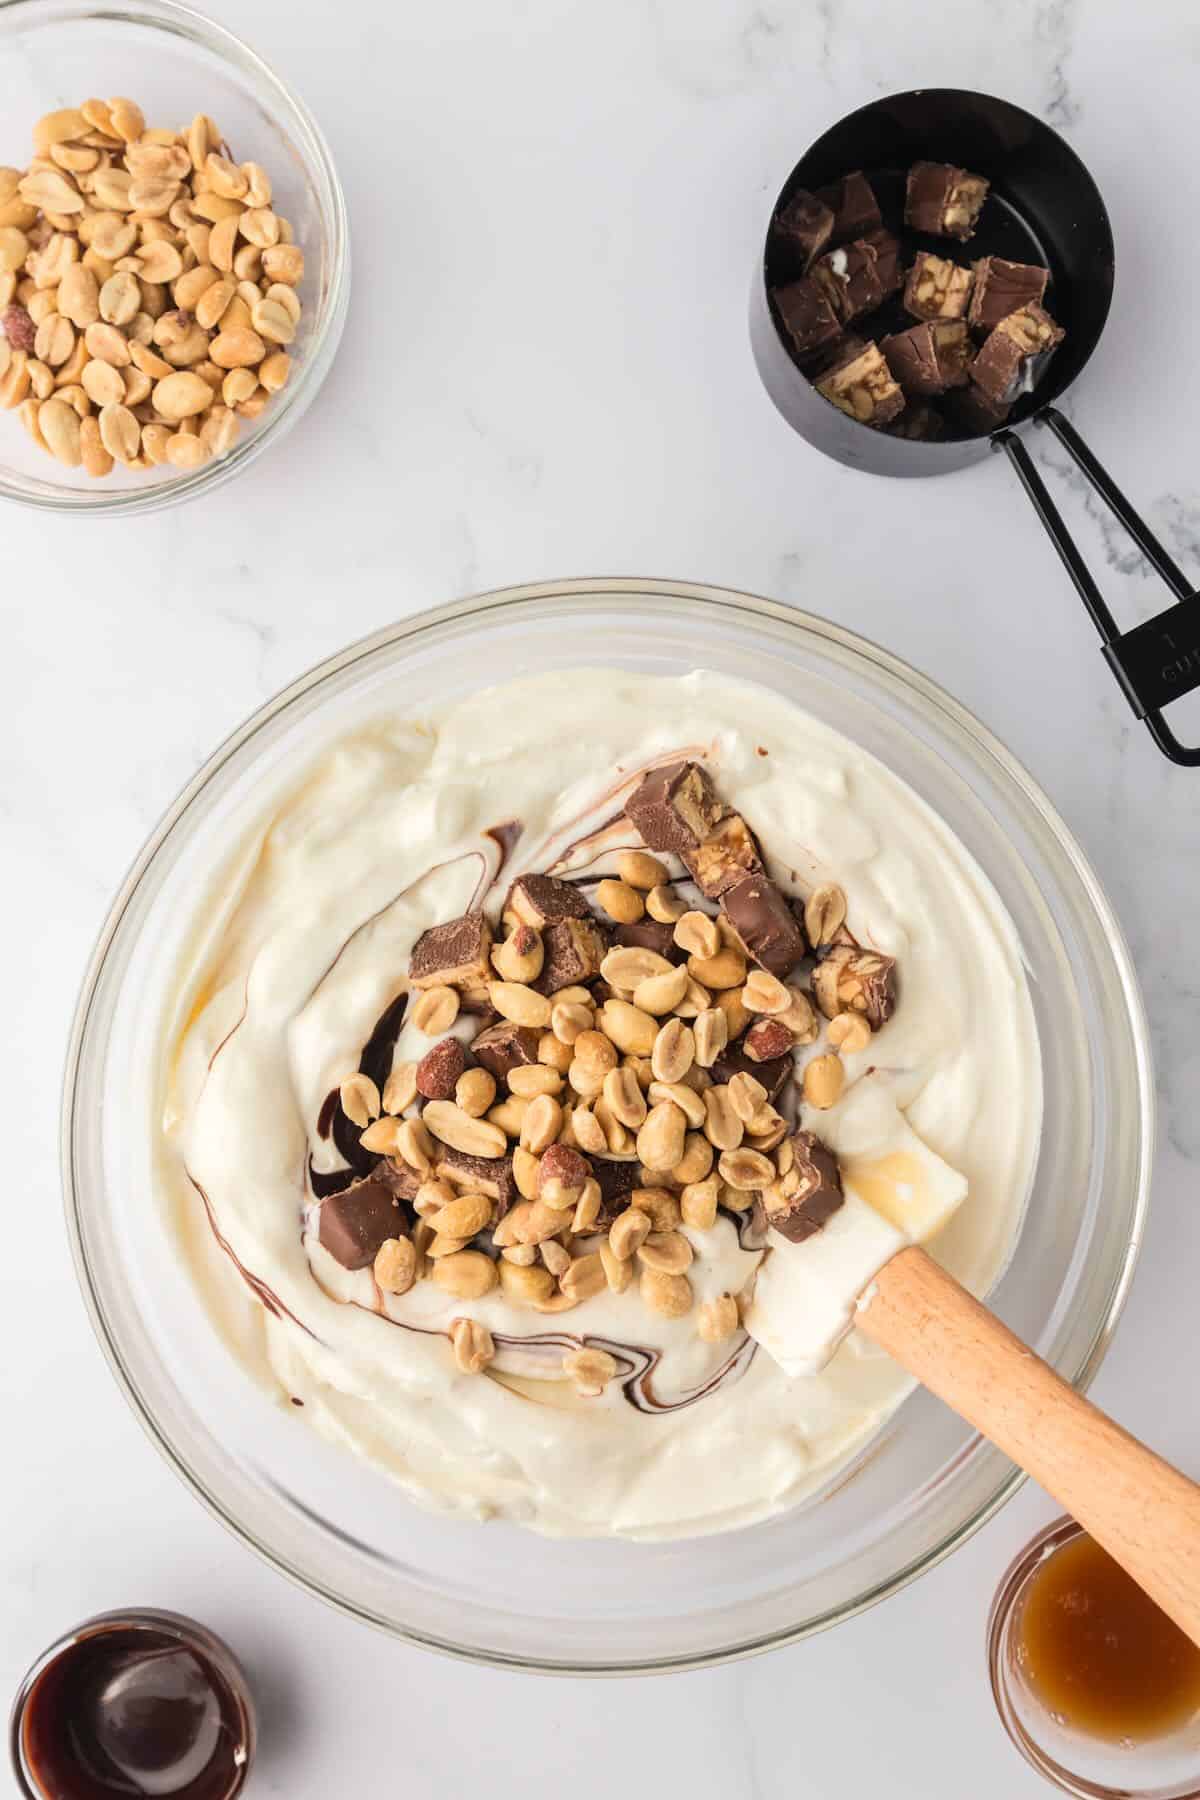 Whipped cream, condensed milk, chocolate sauce, and peanuts in a bowl. 